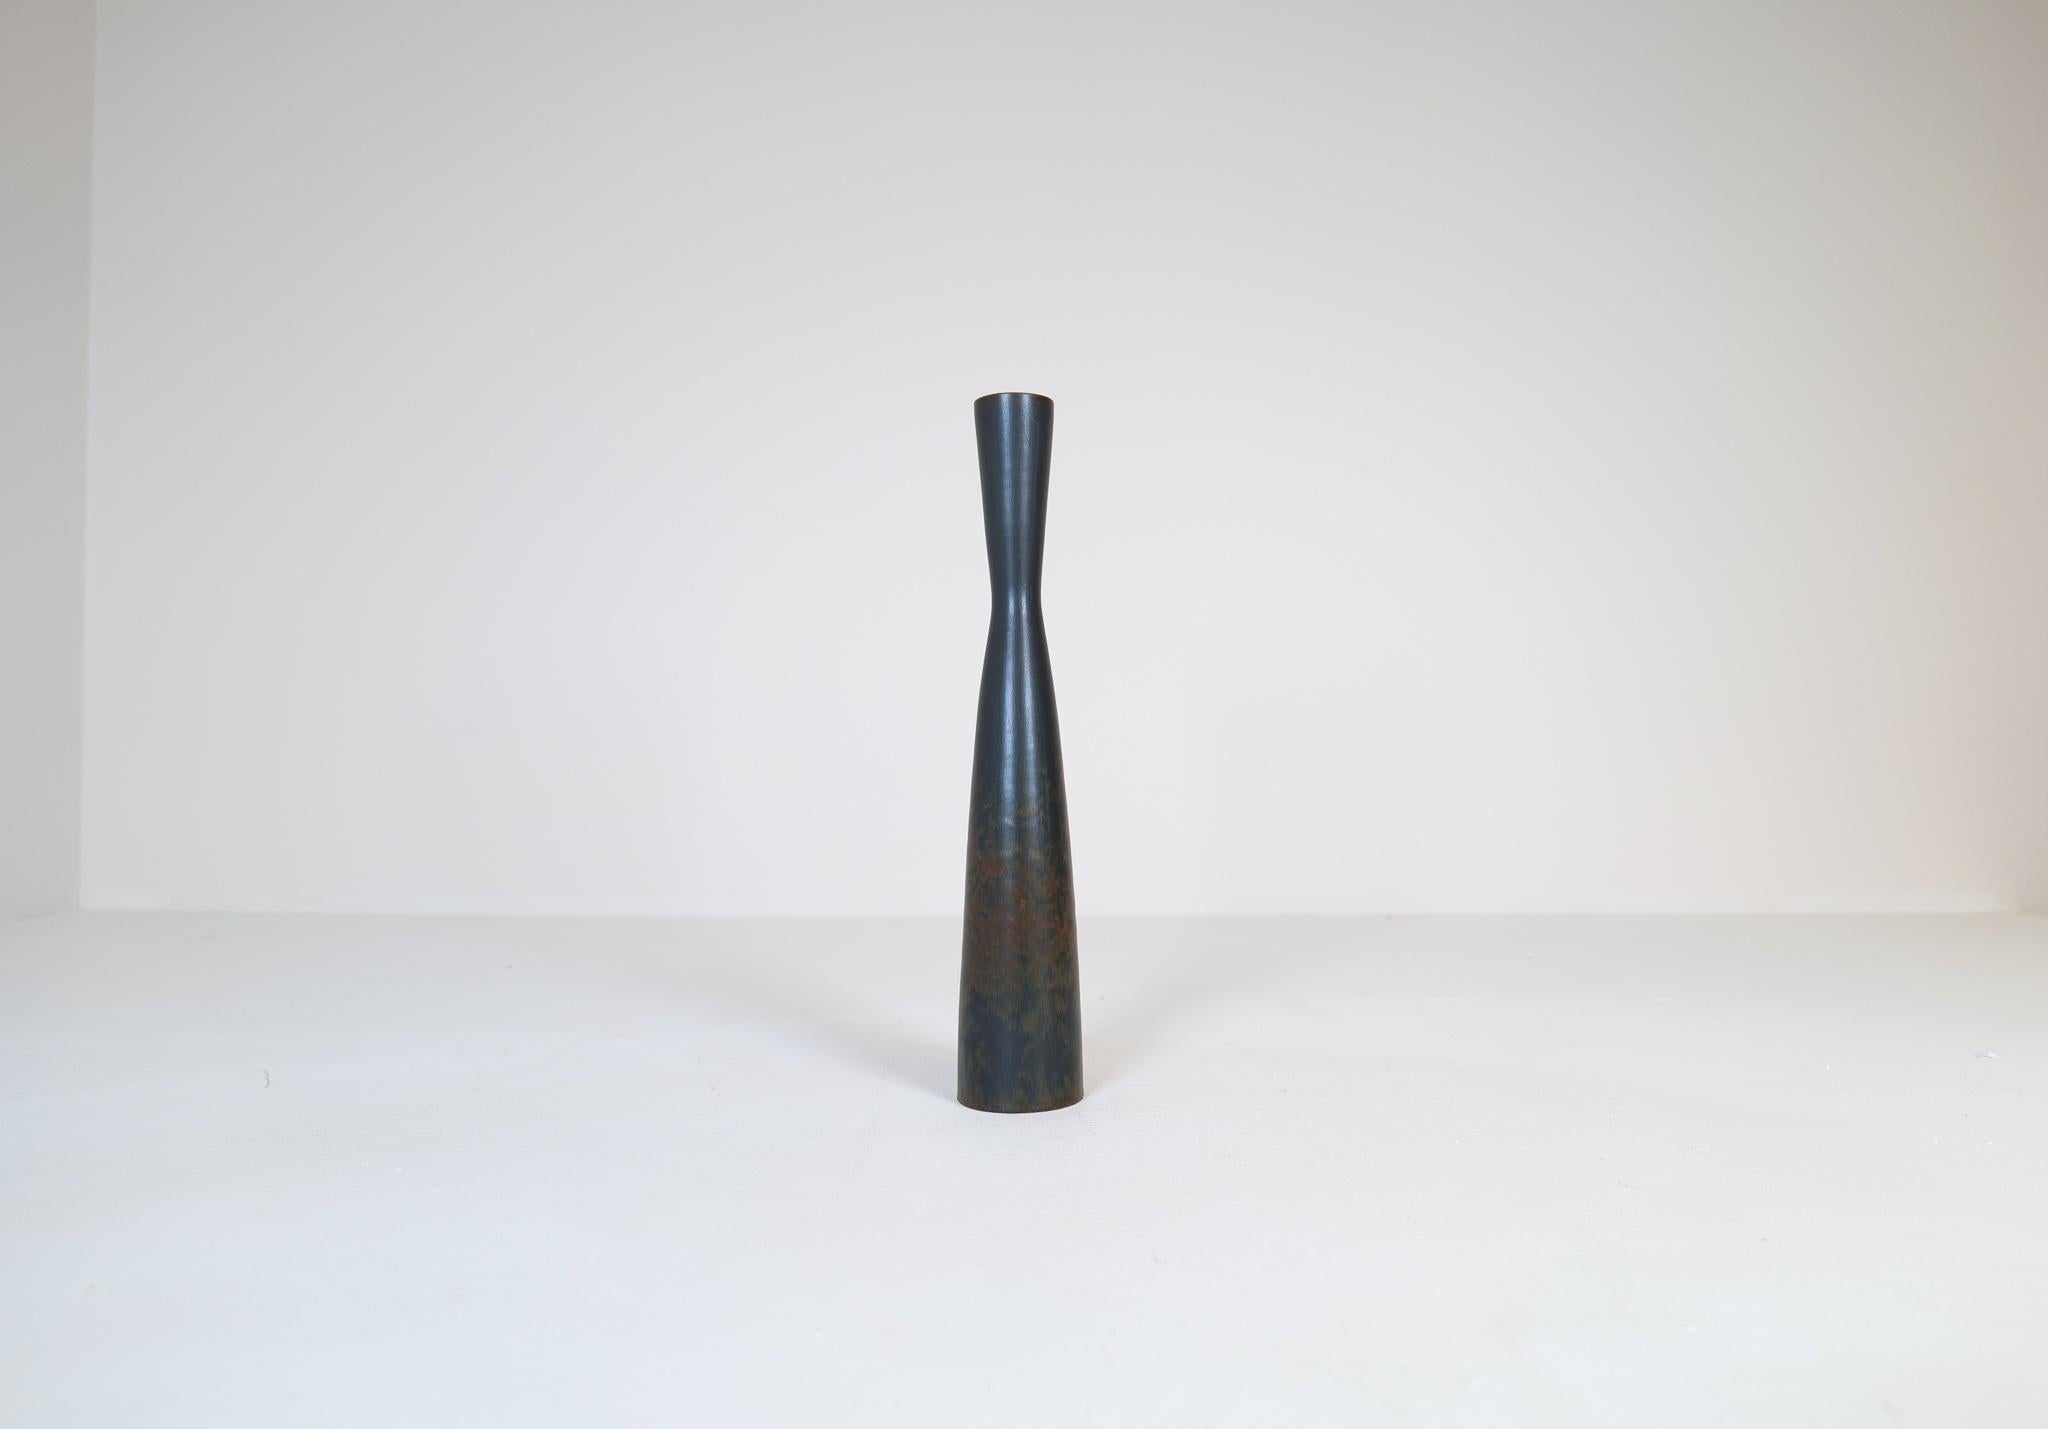 This exceptional vase from Rörstrand and maker or designer Carl Harry Stålhane, was made in Sweden in the midcentury. Its beautiful glazed combined with its incredible hourglass shaped forms makes this an exceptional good piece. The glaze and